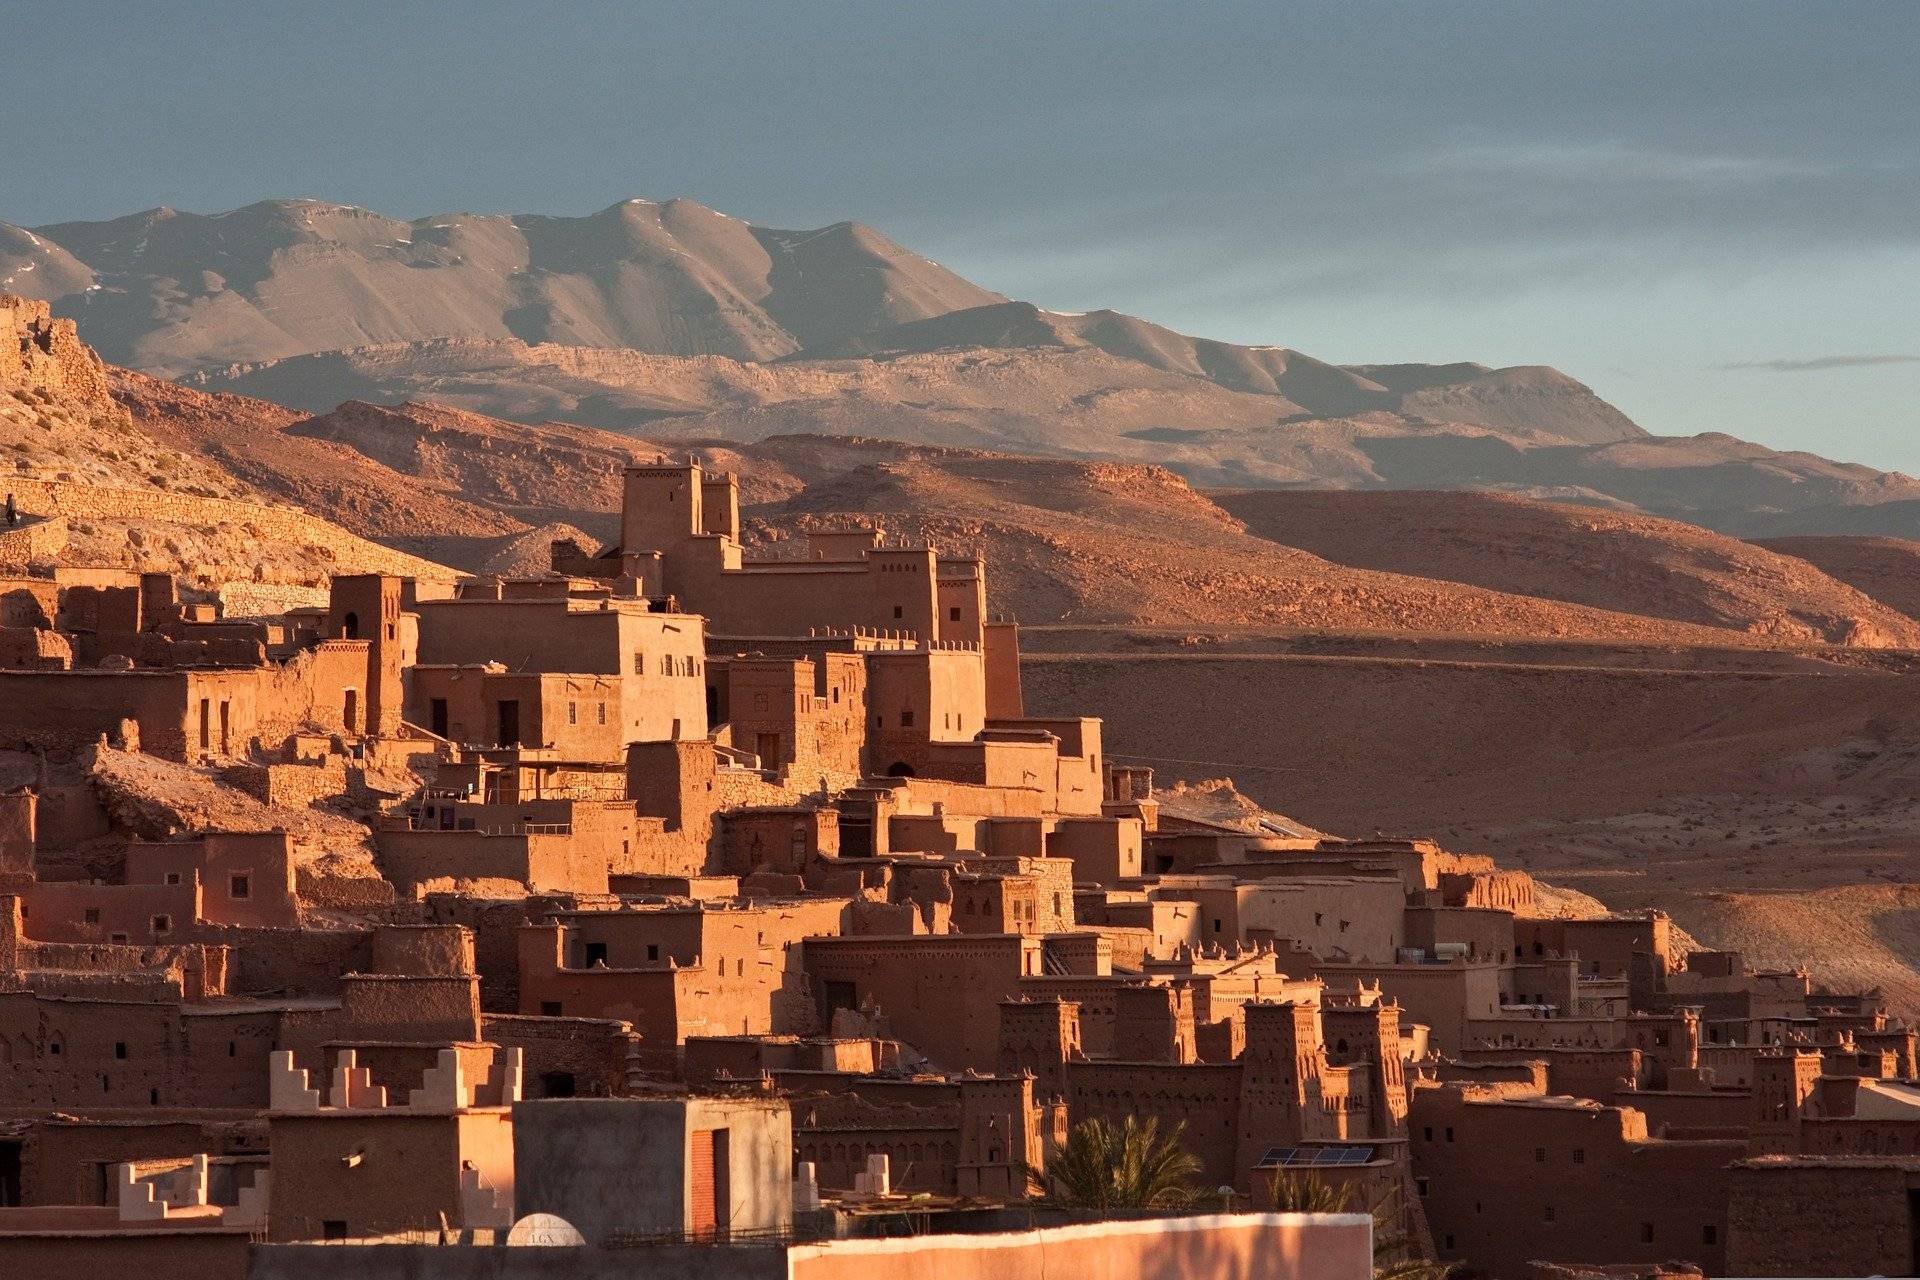 morocco g7c31b851f 1920 - Morocco Private Tours - Best Morocco Tours - Morocco Desert Tours